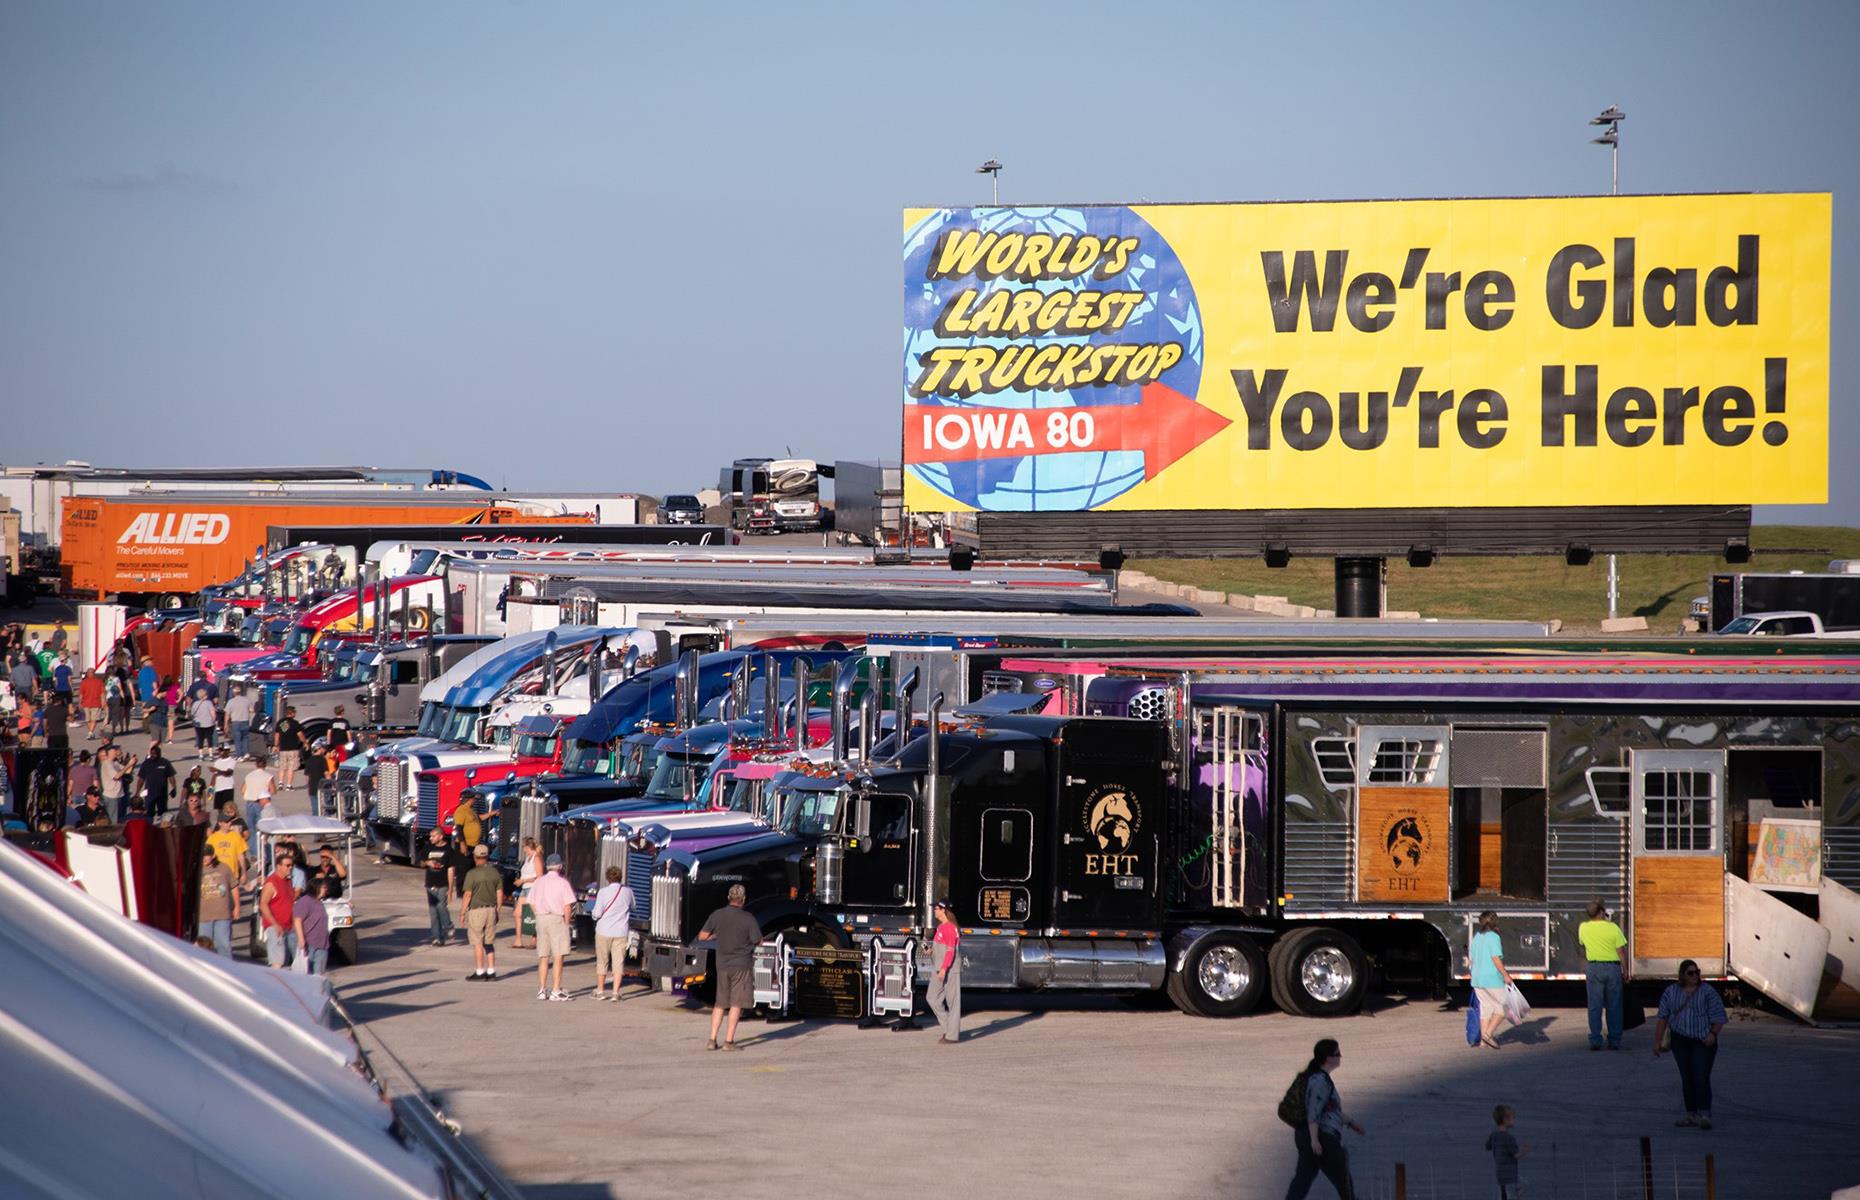 <p>Encompassing a mind-boggling 100,000 square feet (9,290sqm) of space, Iowa 80 is reportedly <a href="https://iowa80truckstop.com/inews/worlds-largest-truckstop-moves-forward-with-massive-expansion-and-remodel/">the world’s largest truck stop</a>. There are many fast food options but make a beeline for Iowa 80 Kitchen. Customers love the grilled pork chop which comes with two sides, the <a href="https://www.facebook.com/IOWA80WLT/reviews/?ref=page_internal">friendly service</a> and <a href="https://www.facebook.com/IOWA80WLT/posts/3245355825477469">socially-distanced dining room</a>.</p>